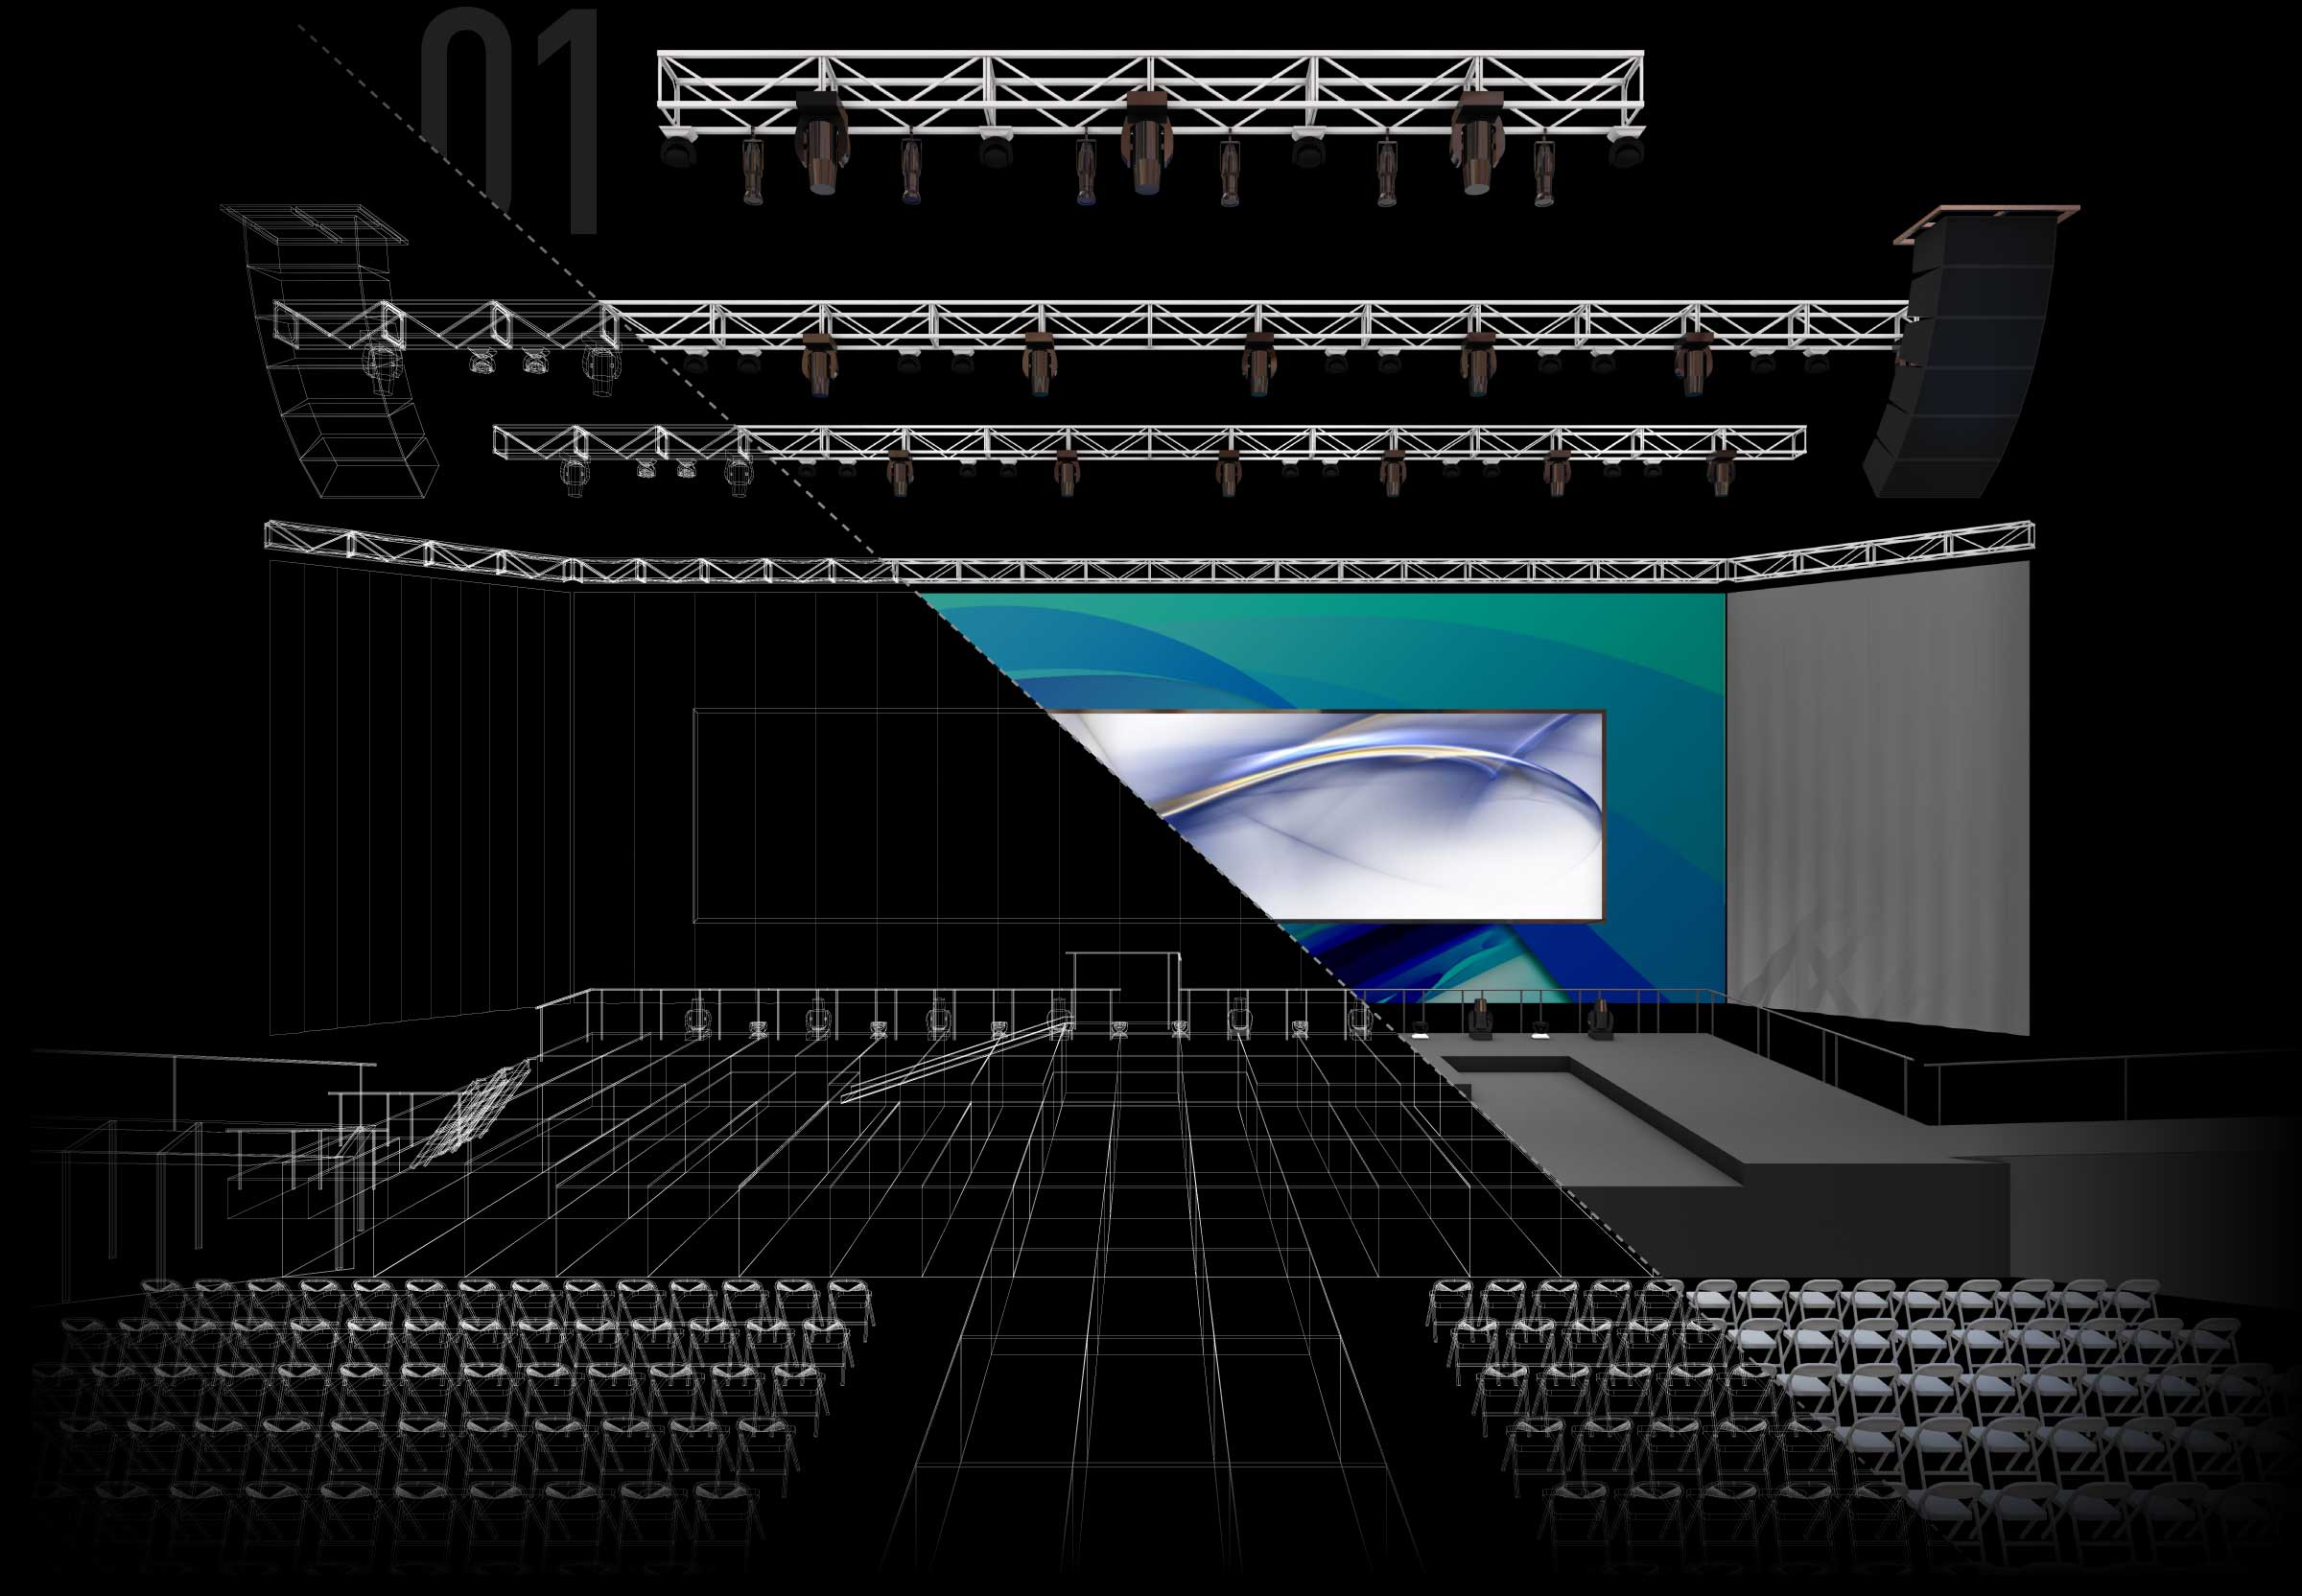 Venue design with drawings and 3D rendering